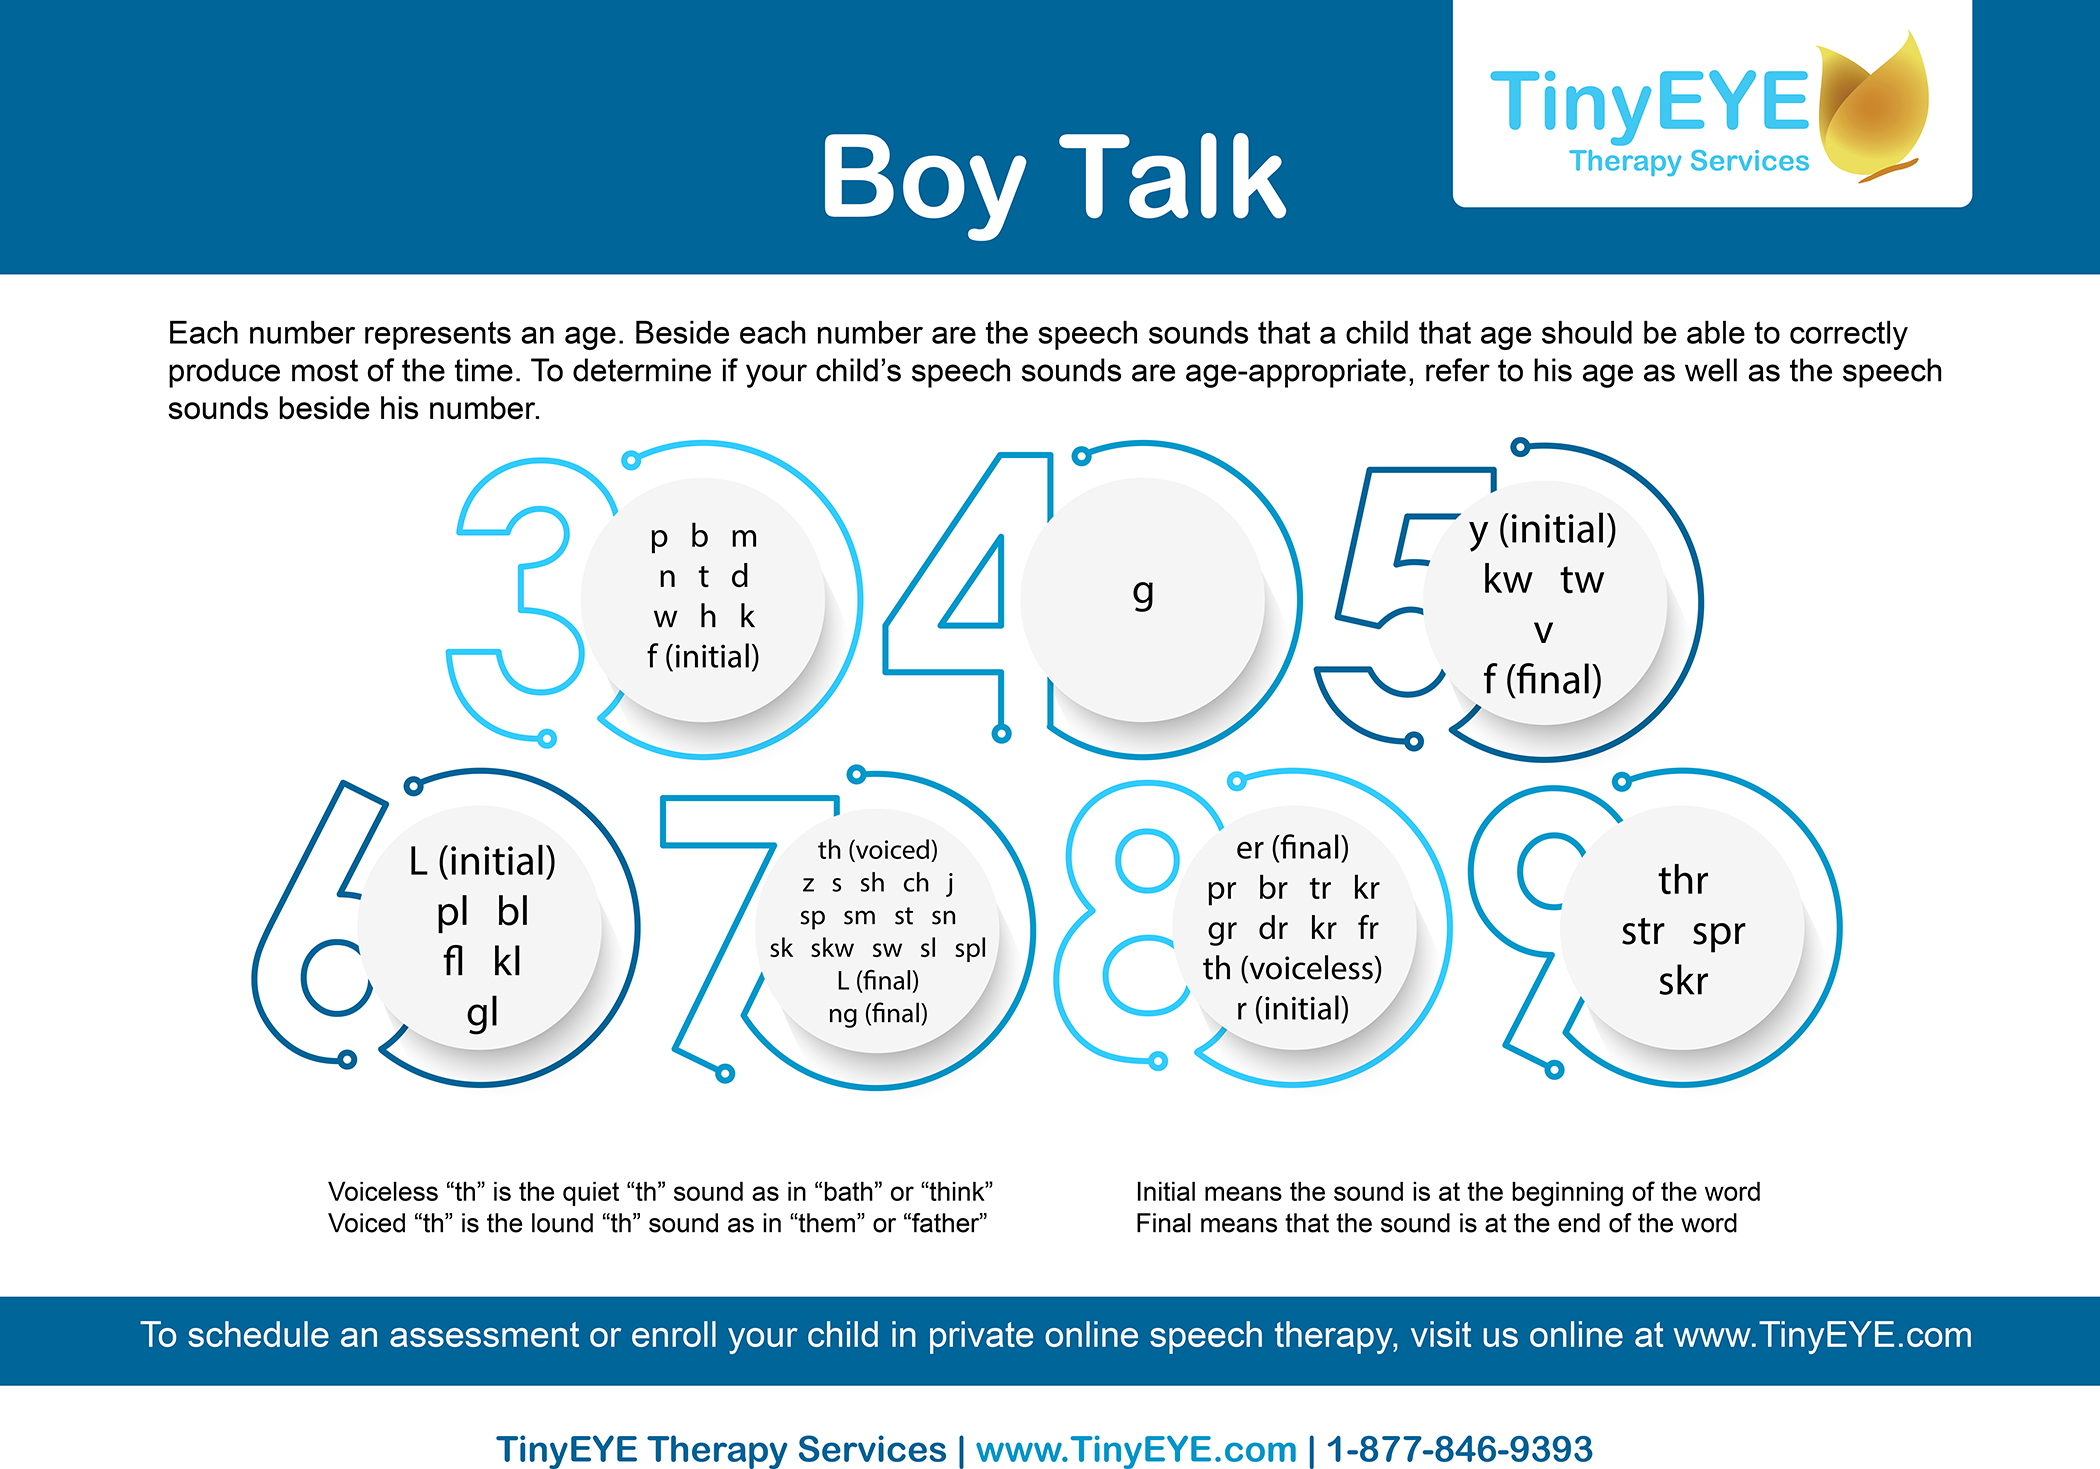 Speech Sounds Milestones for Boys and Girls By Age